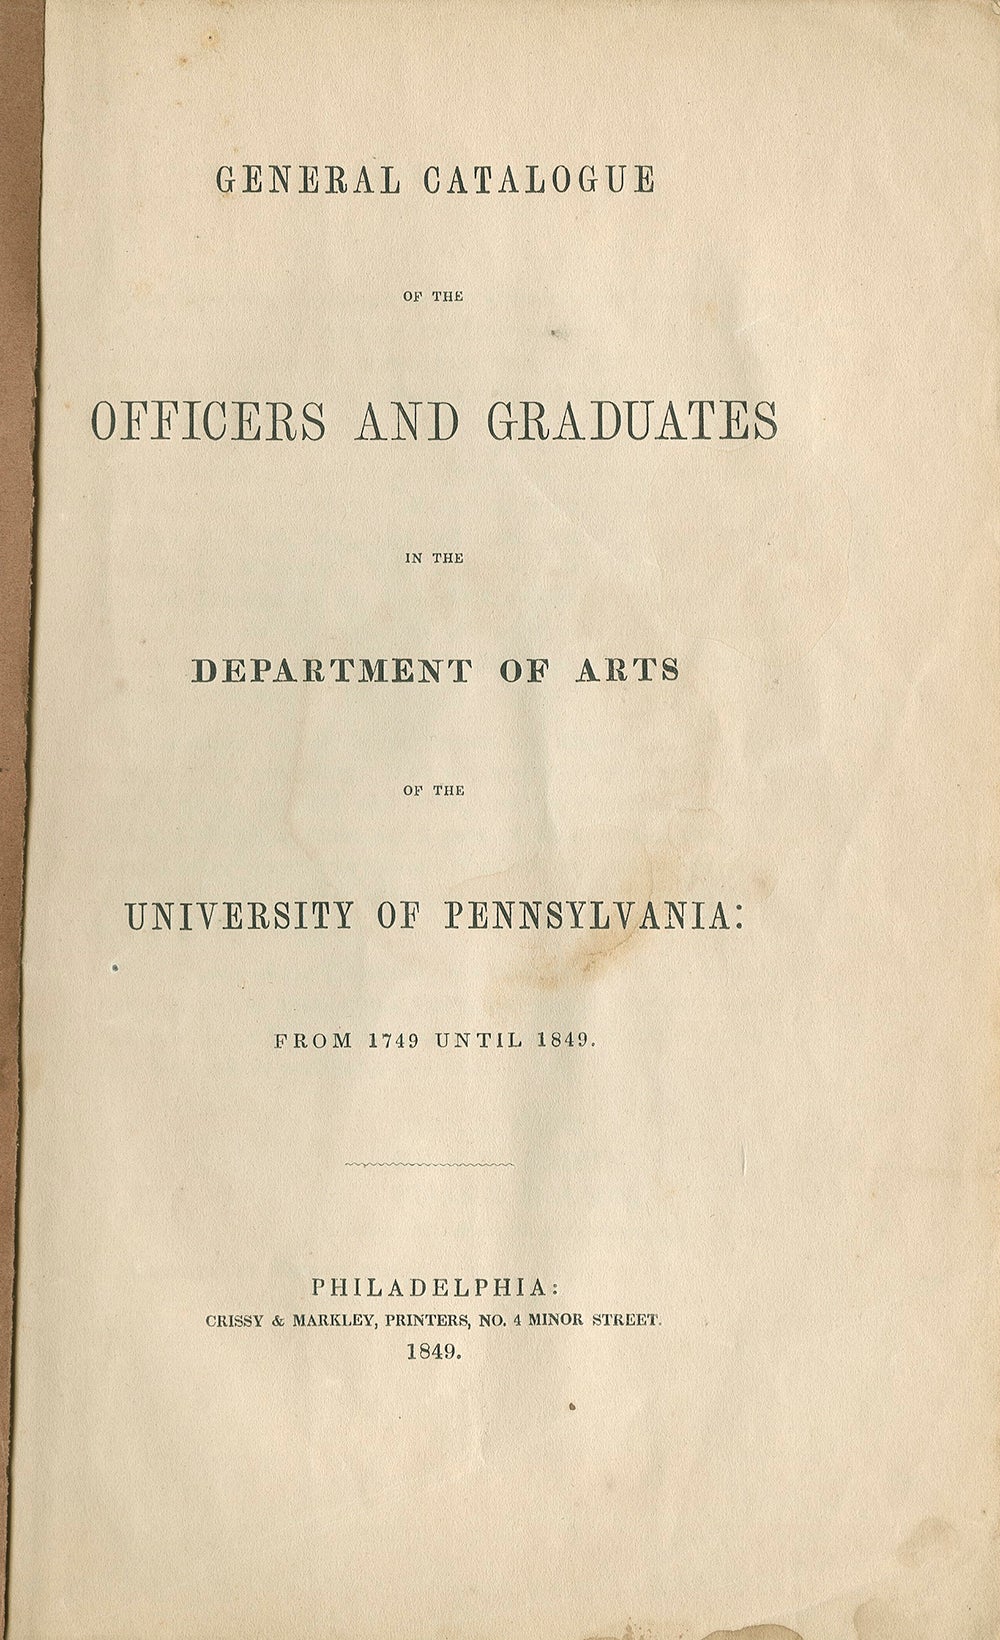 General Catalogue of the Officers and Graduates of the Department of Arts of the University of Pennsylvania: From 1749-1849, cover